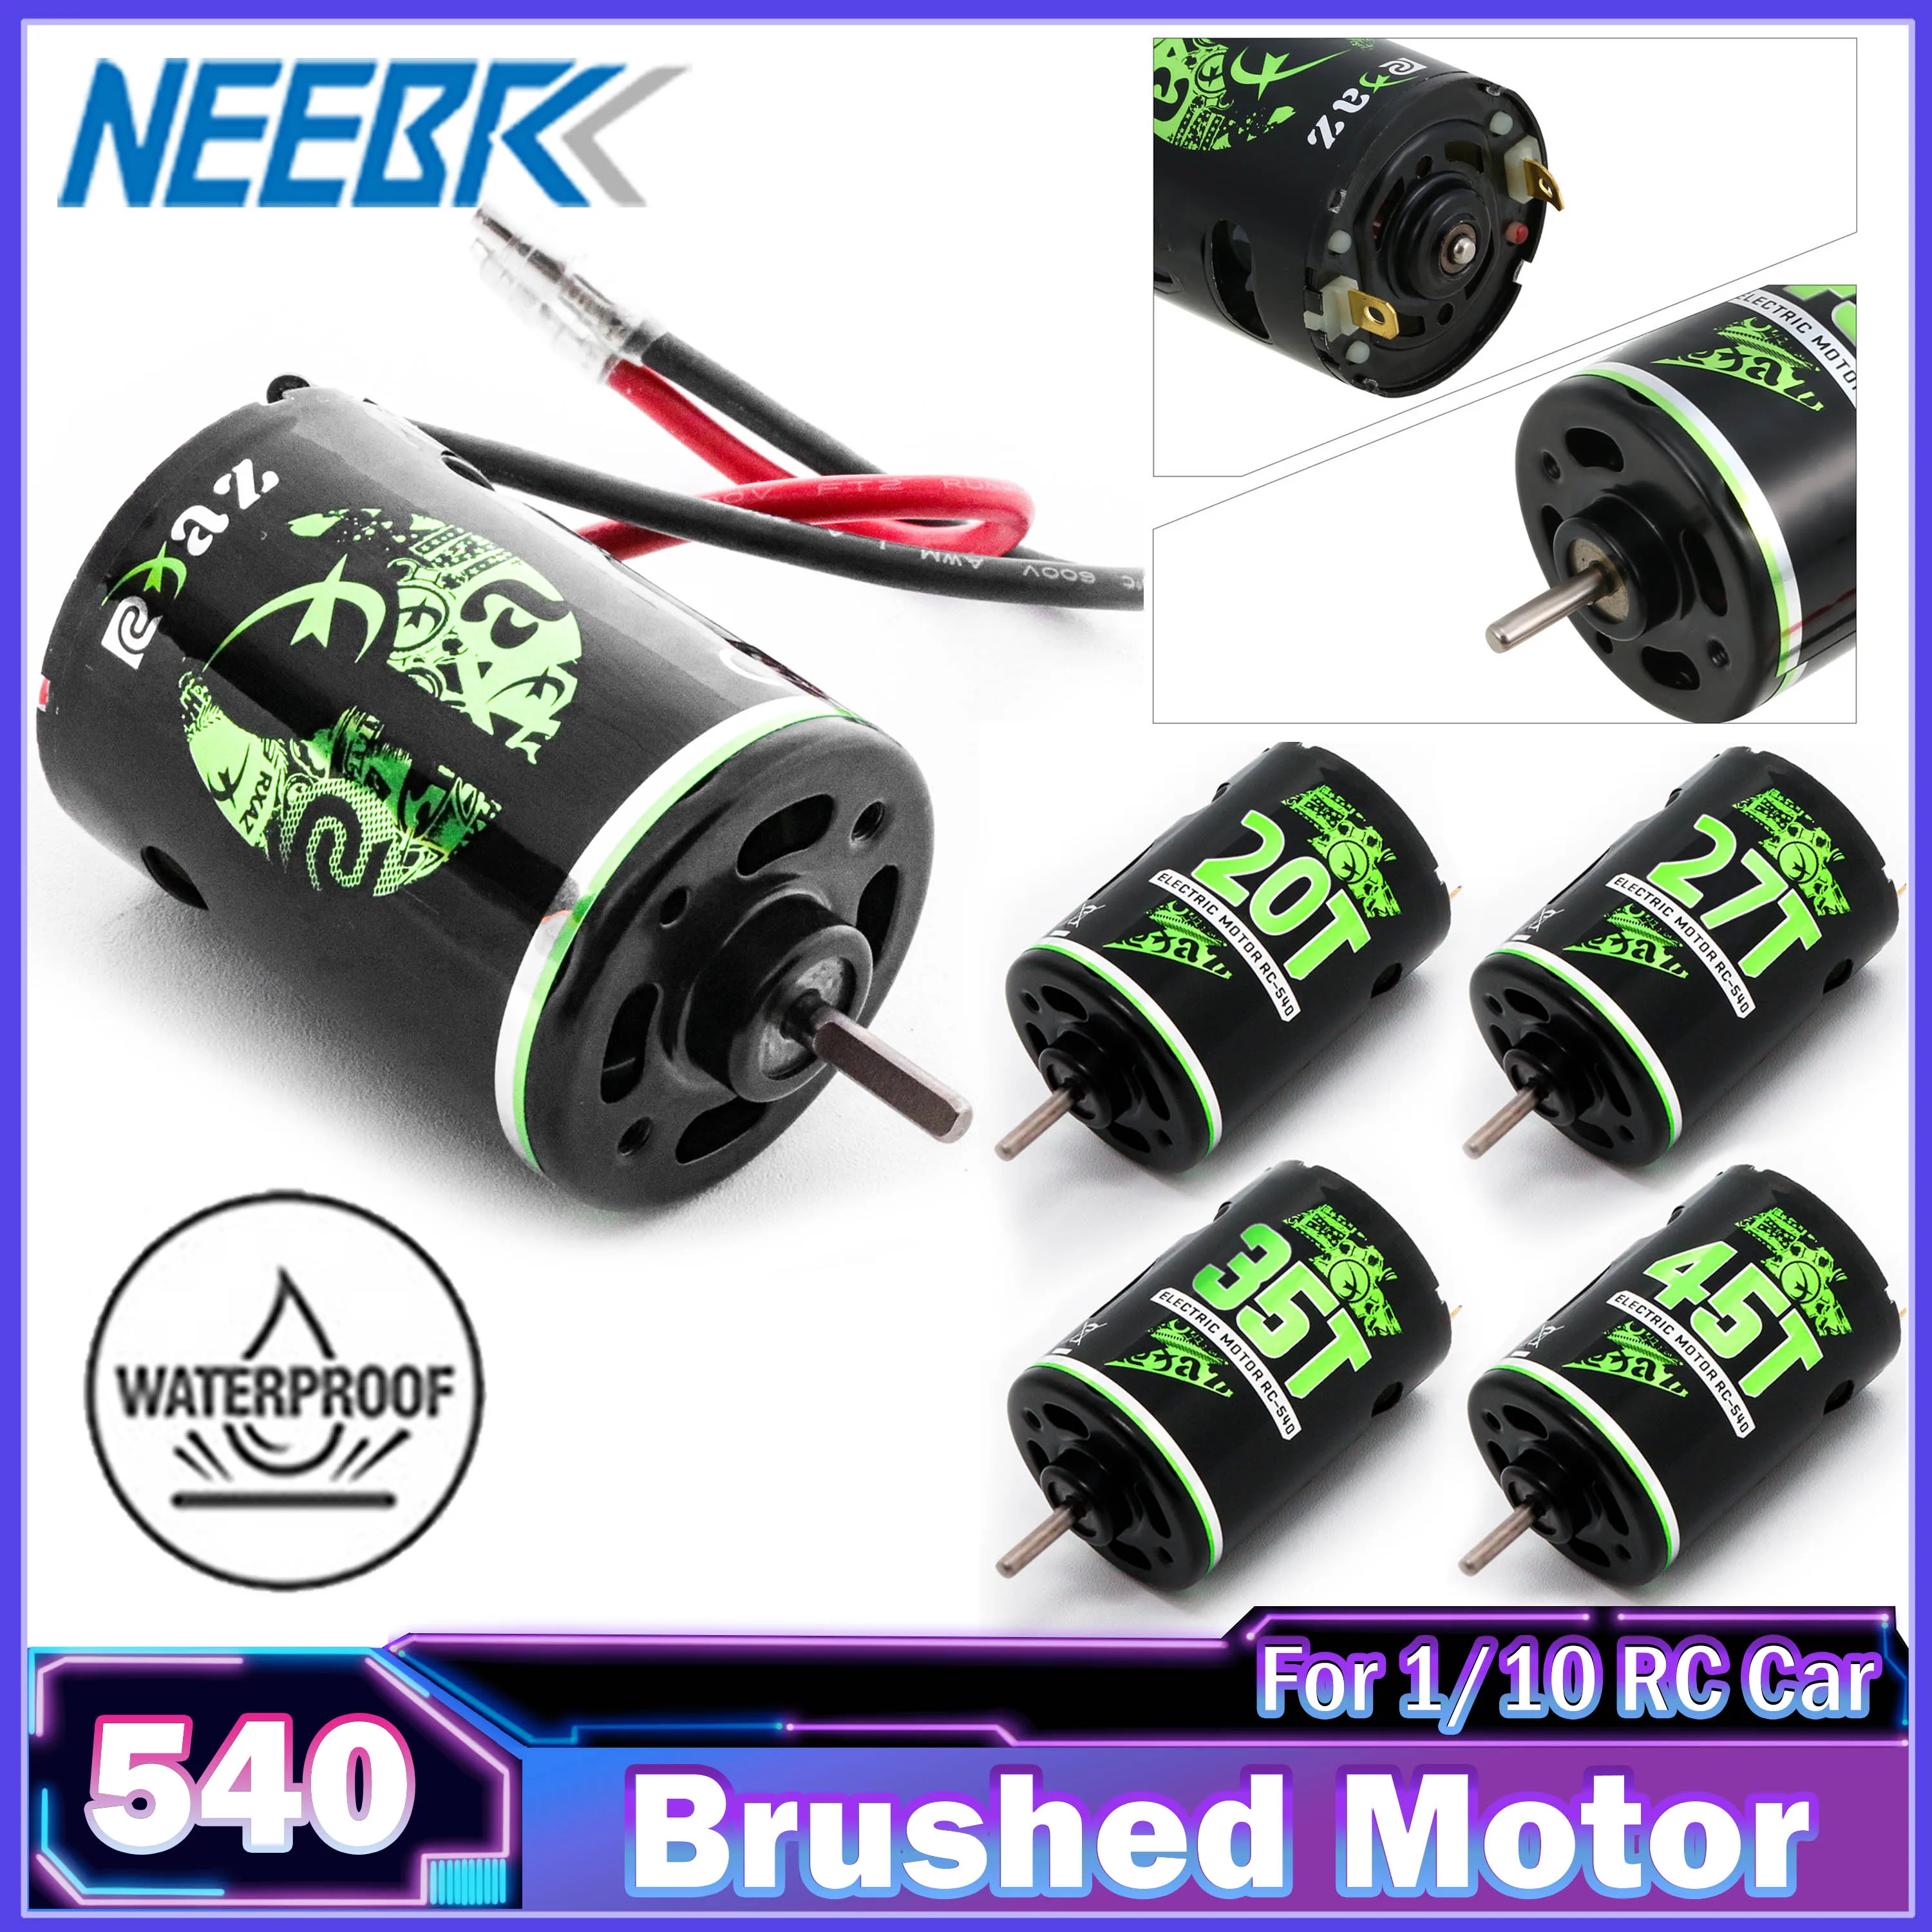 

Waterproof 540 20T-45T Brushed Motor Upgrade for 1:10 RC Car Crawler Wltoys Axial SCX10 Kypsho Redcat Gen8 Traxxas TRX4 Toy TRX6